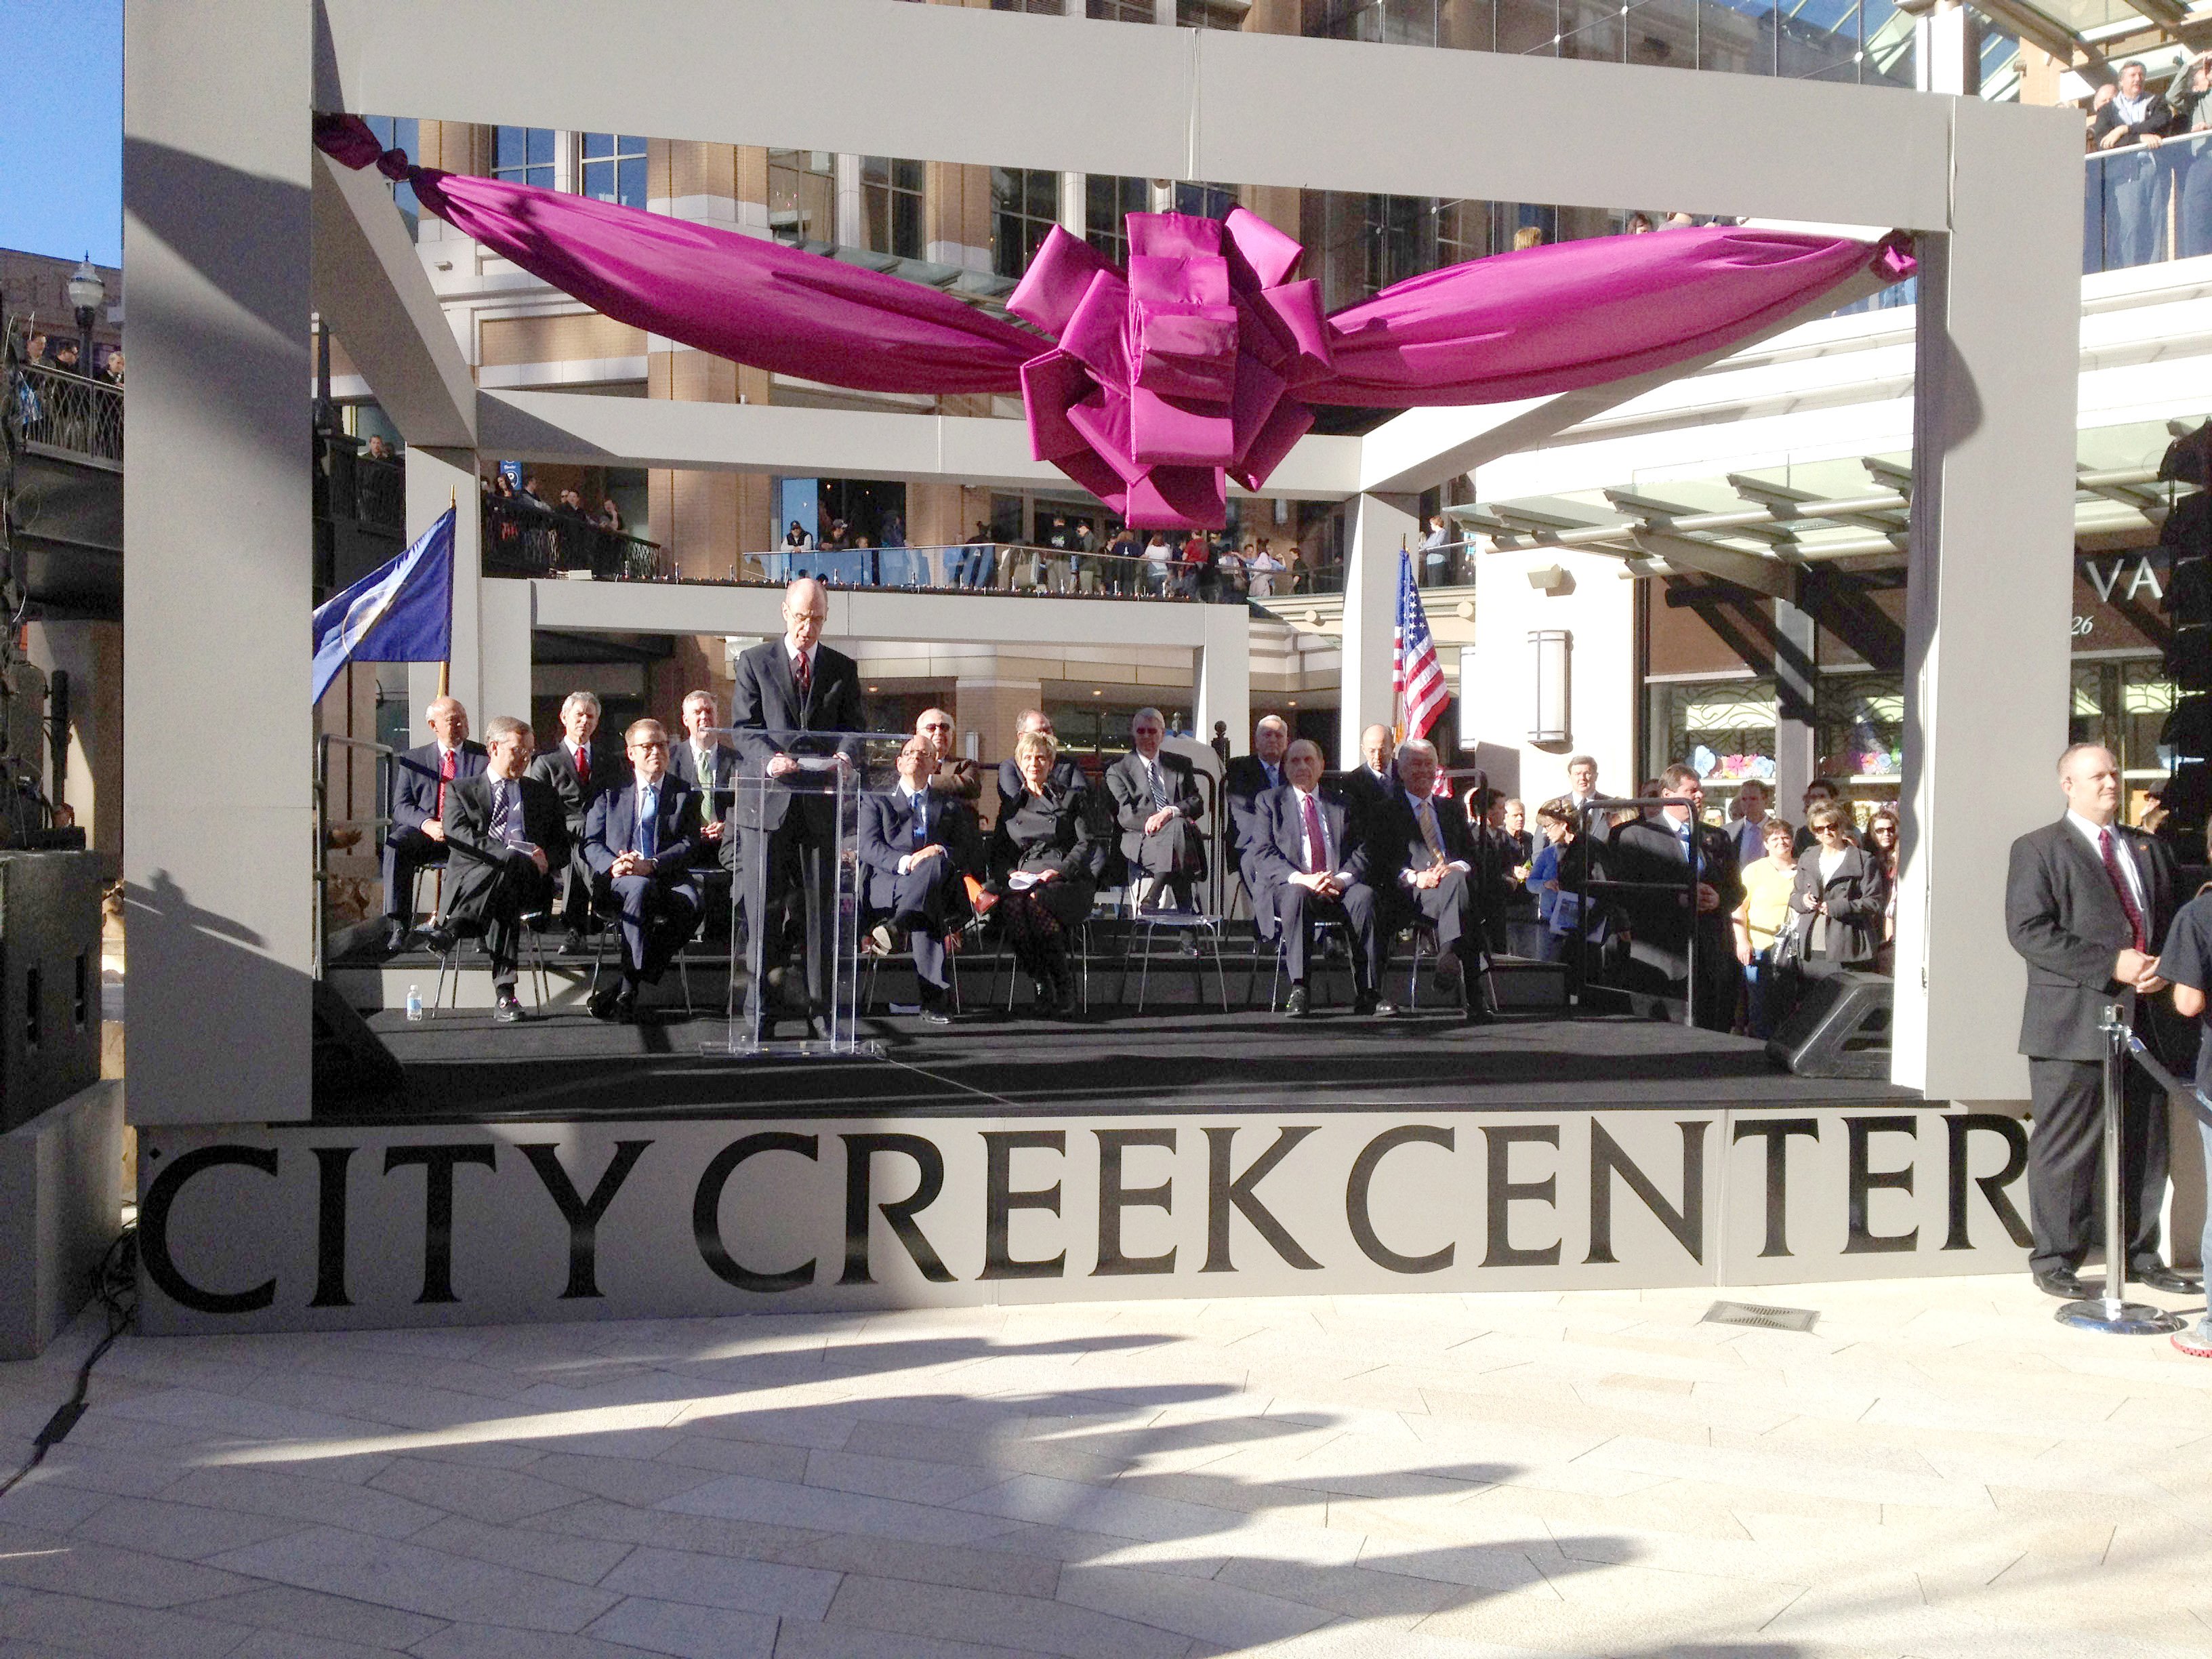 President Henry B. Eyring speaking at the grand opening of the City Creek Mall in Salt Lake City on 22 March 2012, with President Thomas S. Monson and President Dieter F. Uchtdorf sitting in attendance.